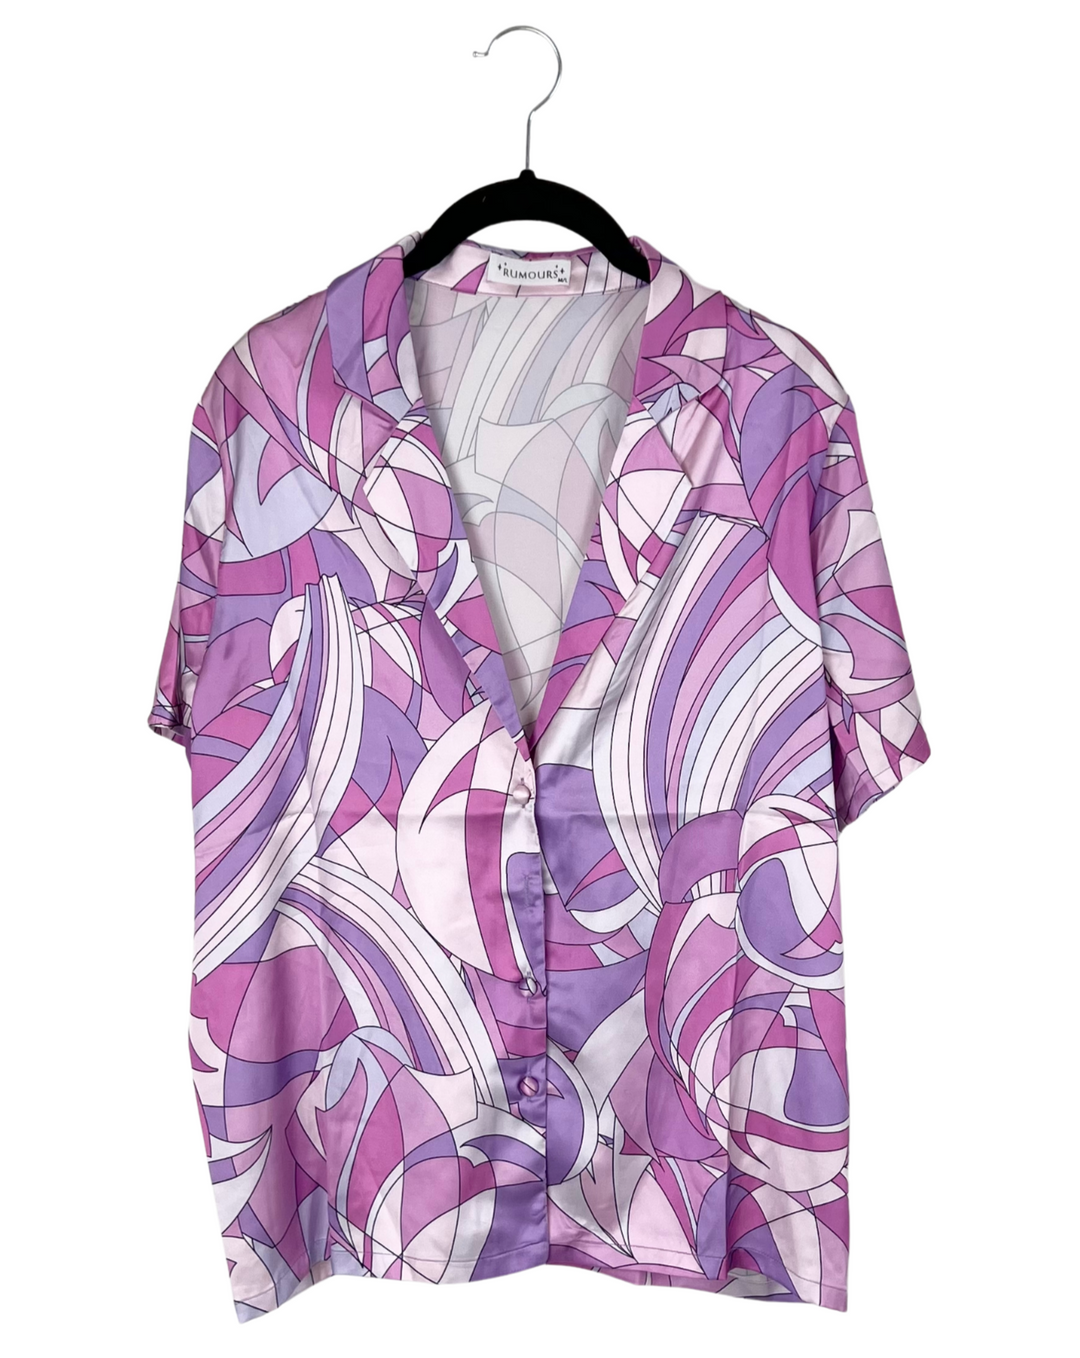 Purple and Pink Abstract Top - Small/Medium